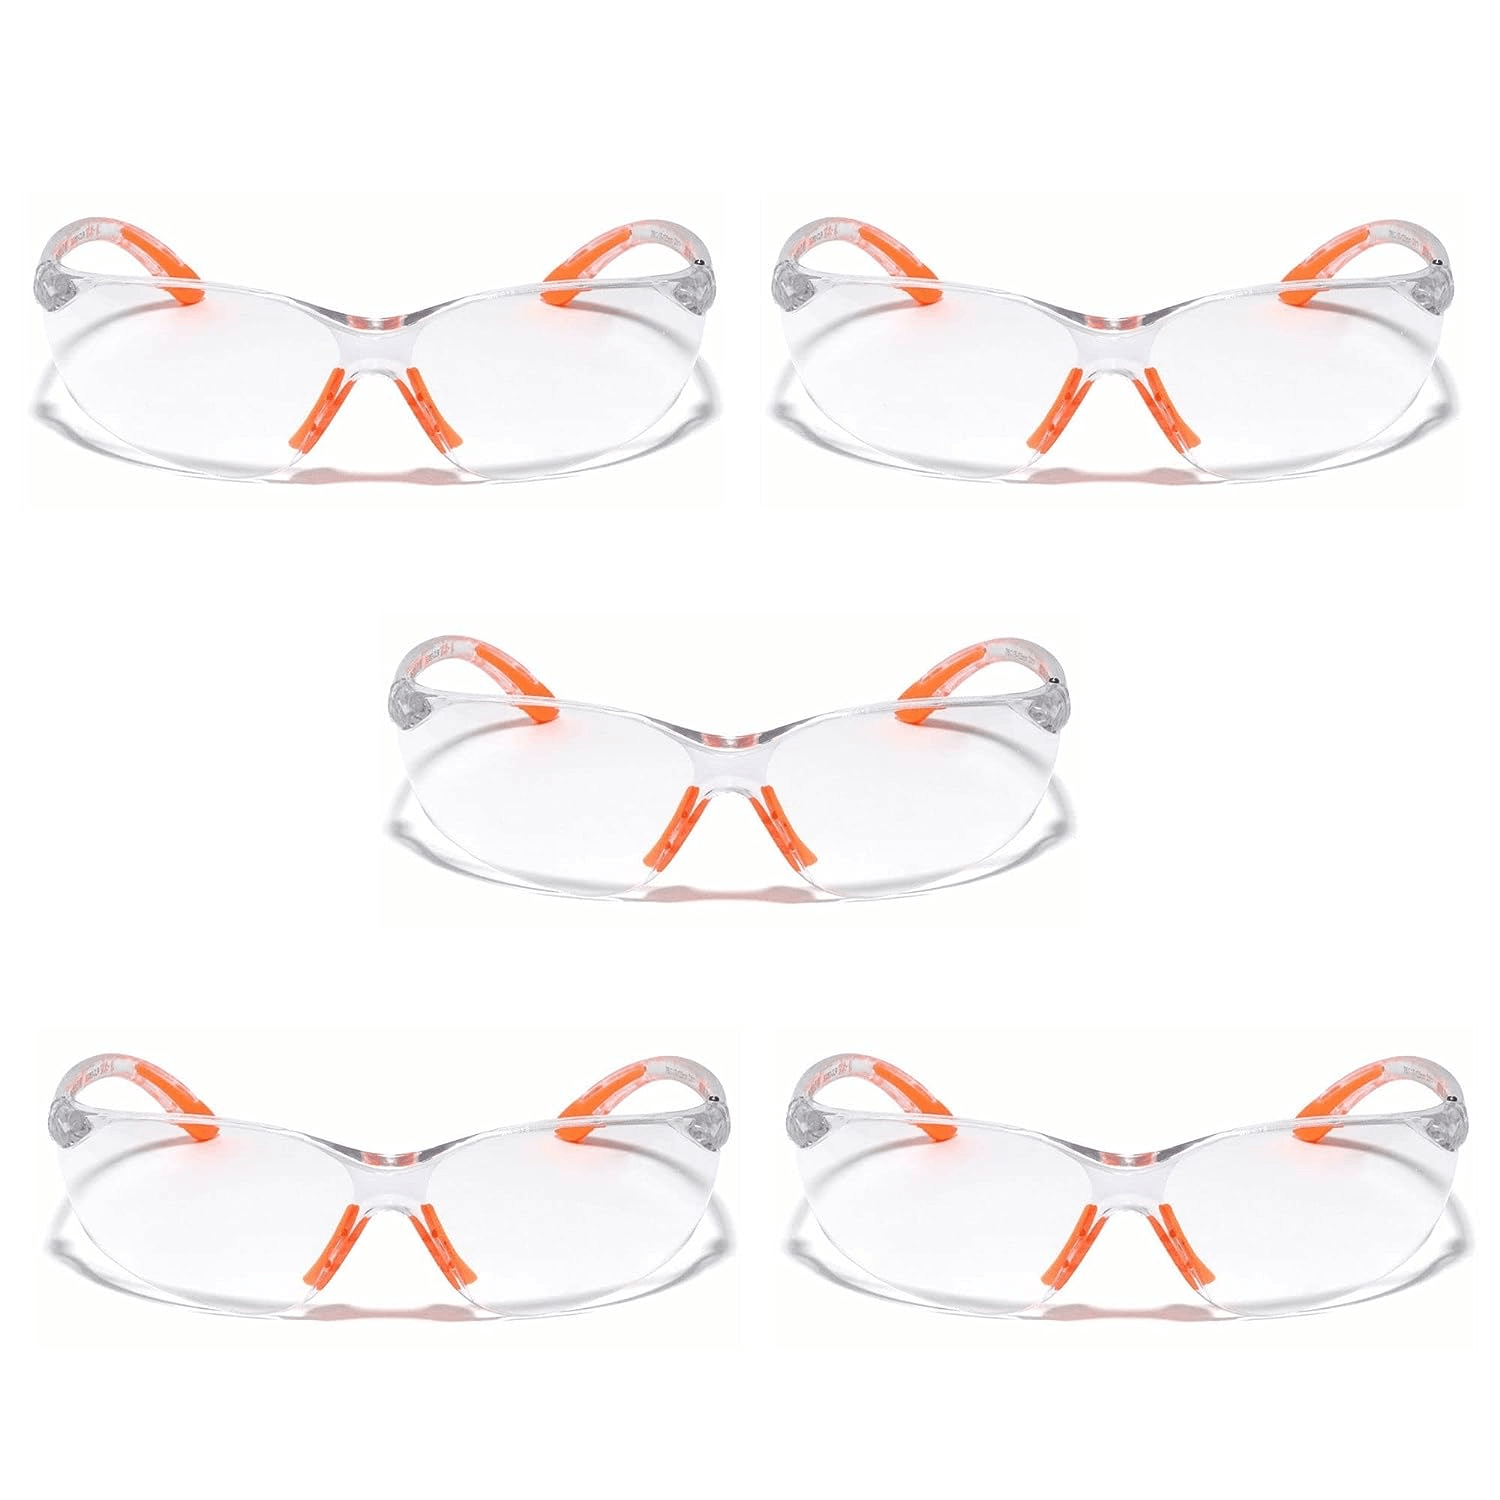 robustt-scratch-resistant-uv-protected-dust-protected-polycarbonate-unbreakable-transparent-safety-goggles-pack-of-5